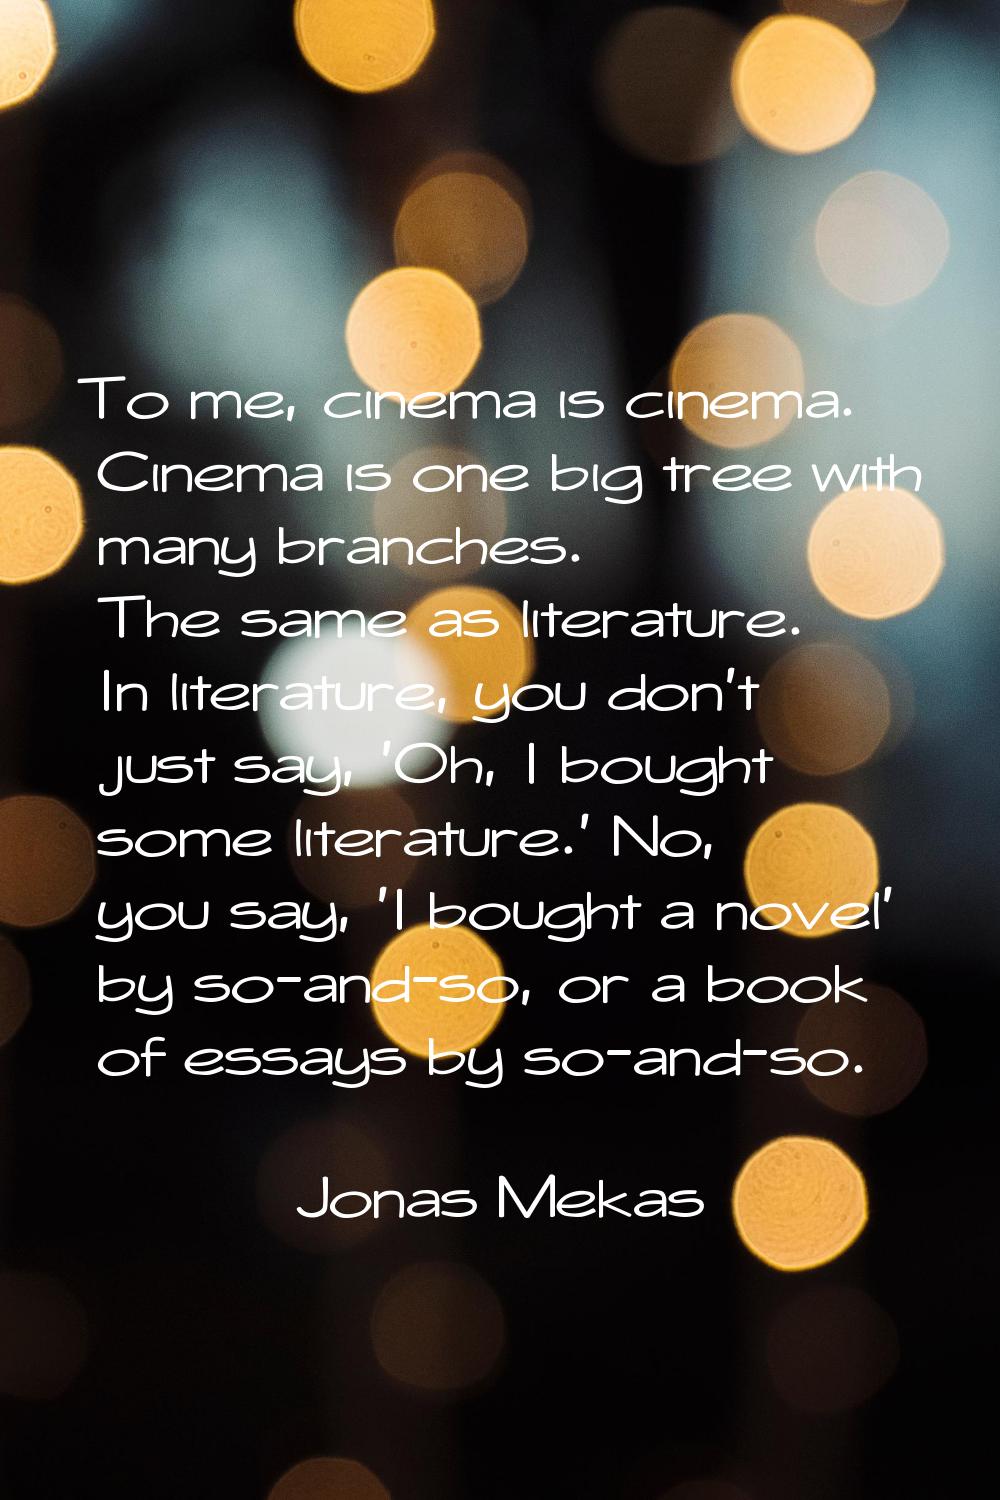 To me, cinema is cinema. Cinema is one big tree with many branches. The same as literature. In lite